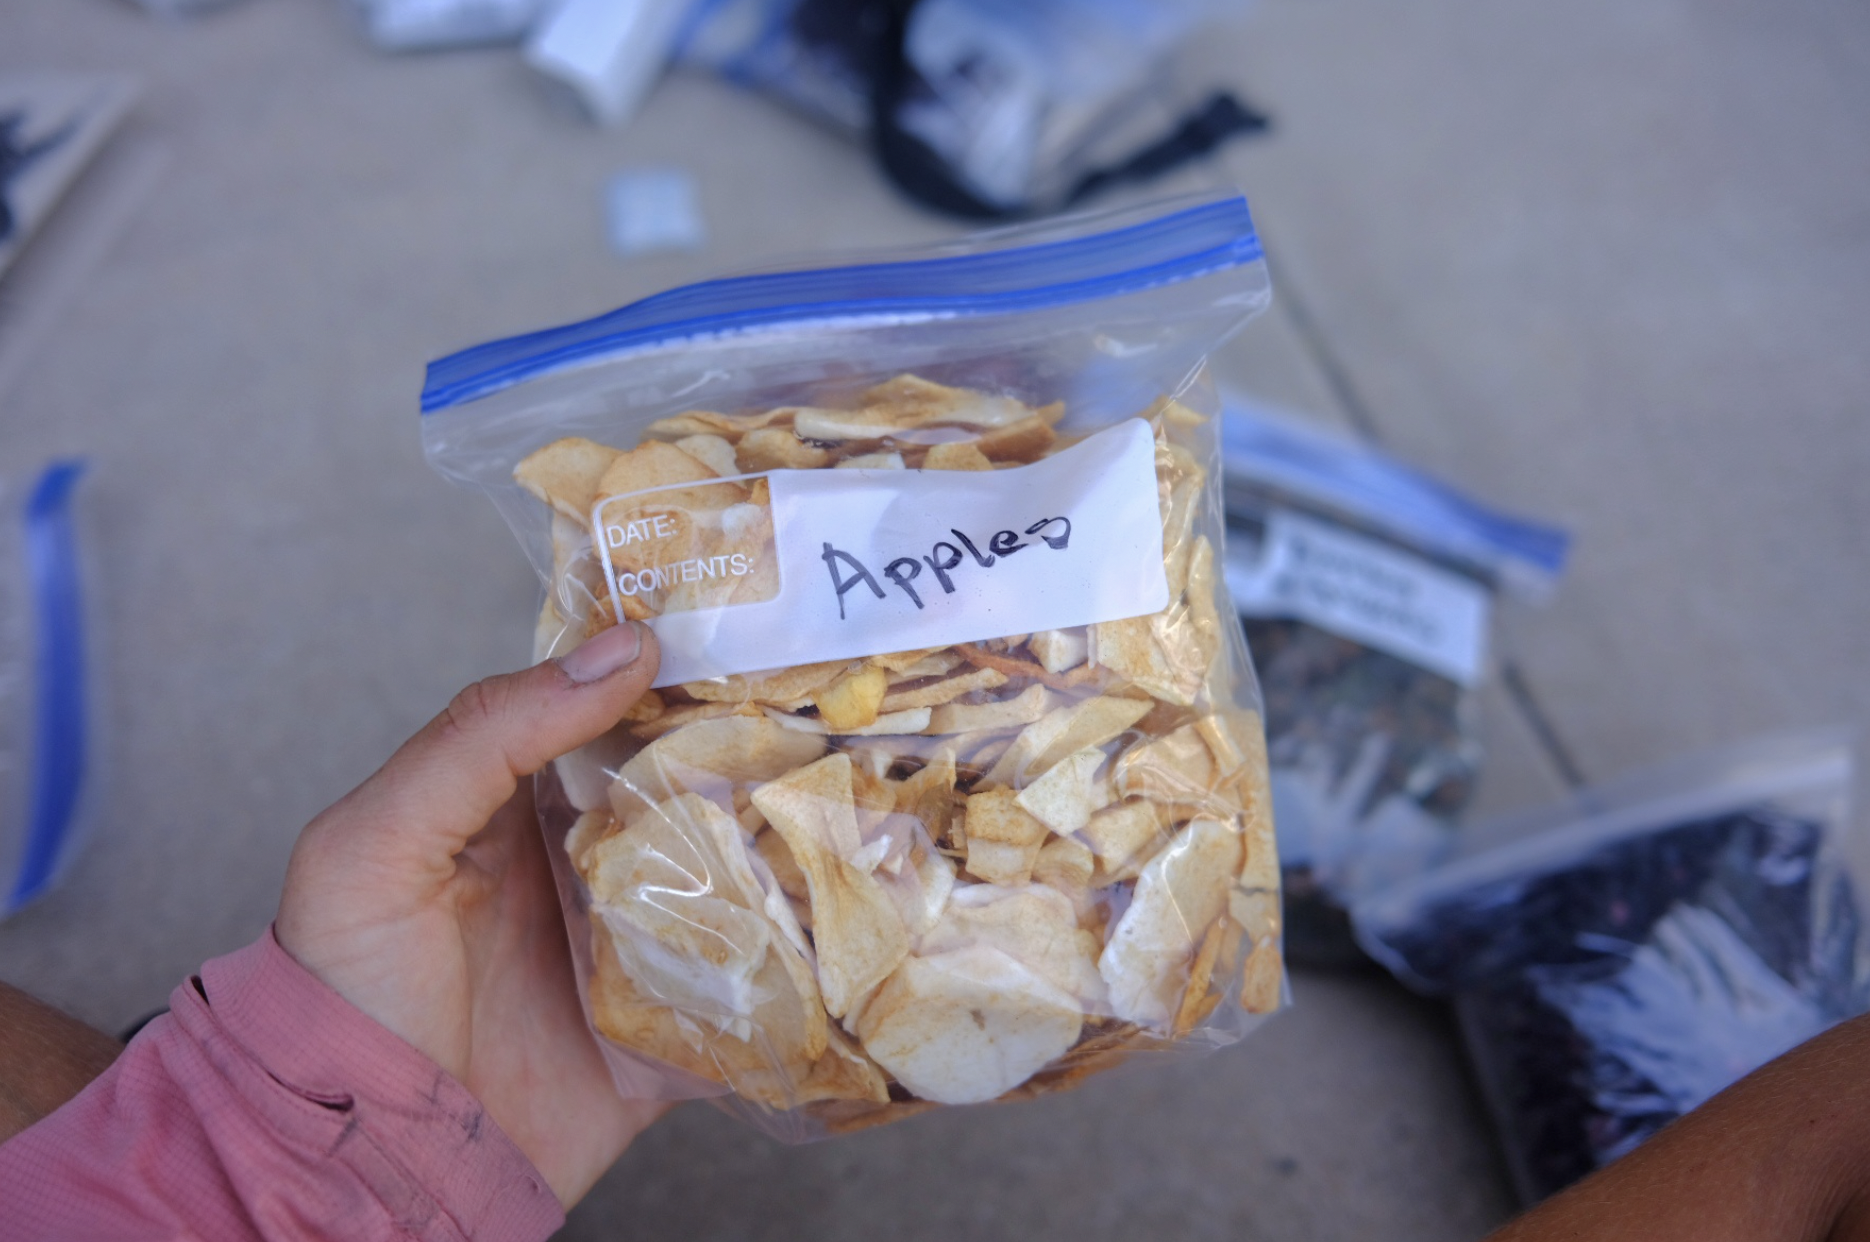 a bag of dried apples held in hand